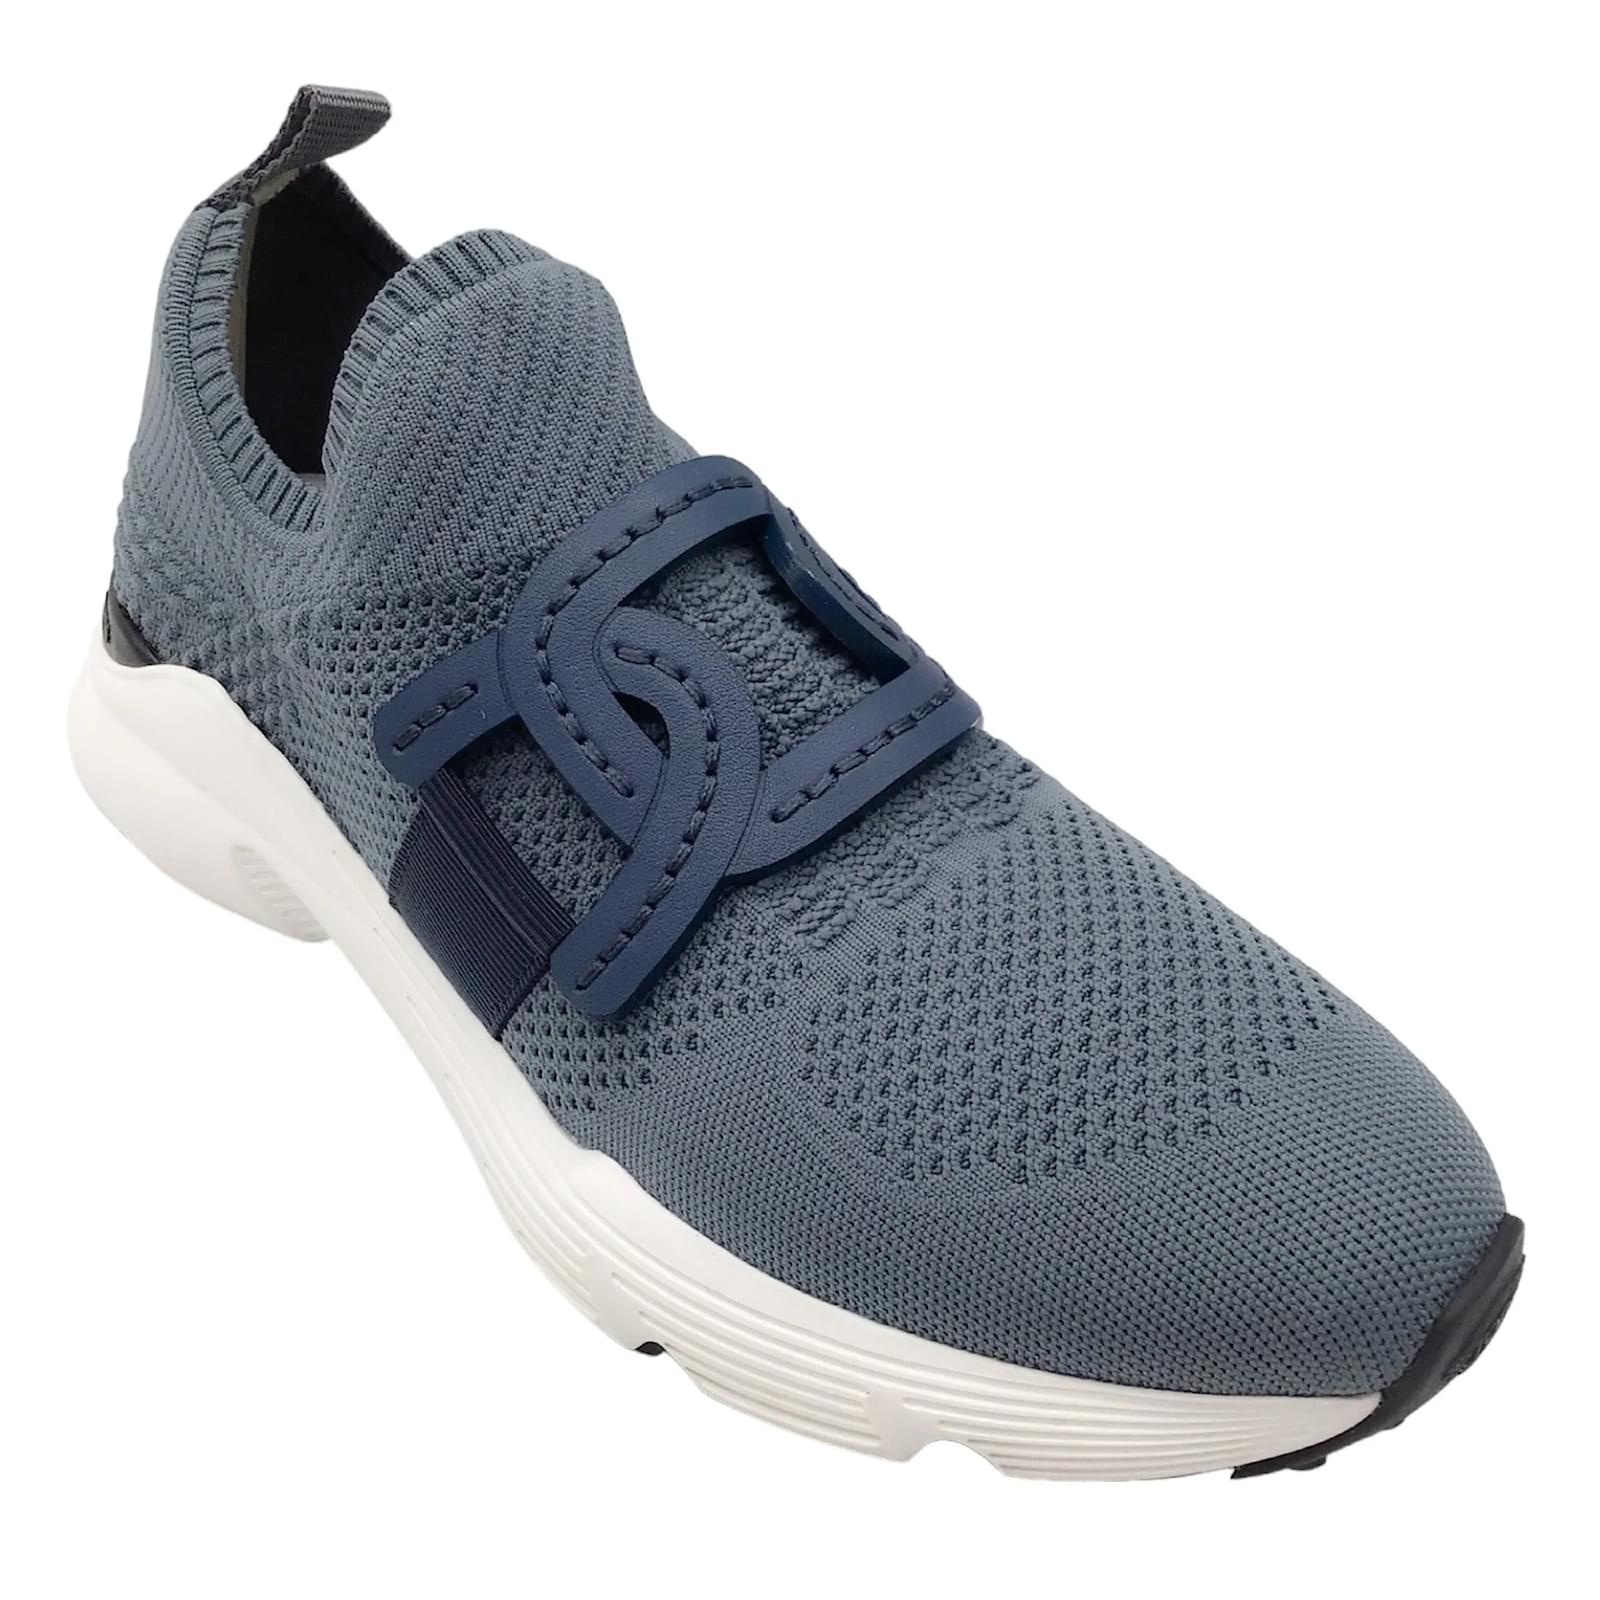 Leather-trimmed knit sneakers